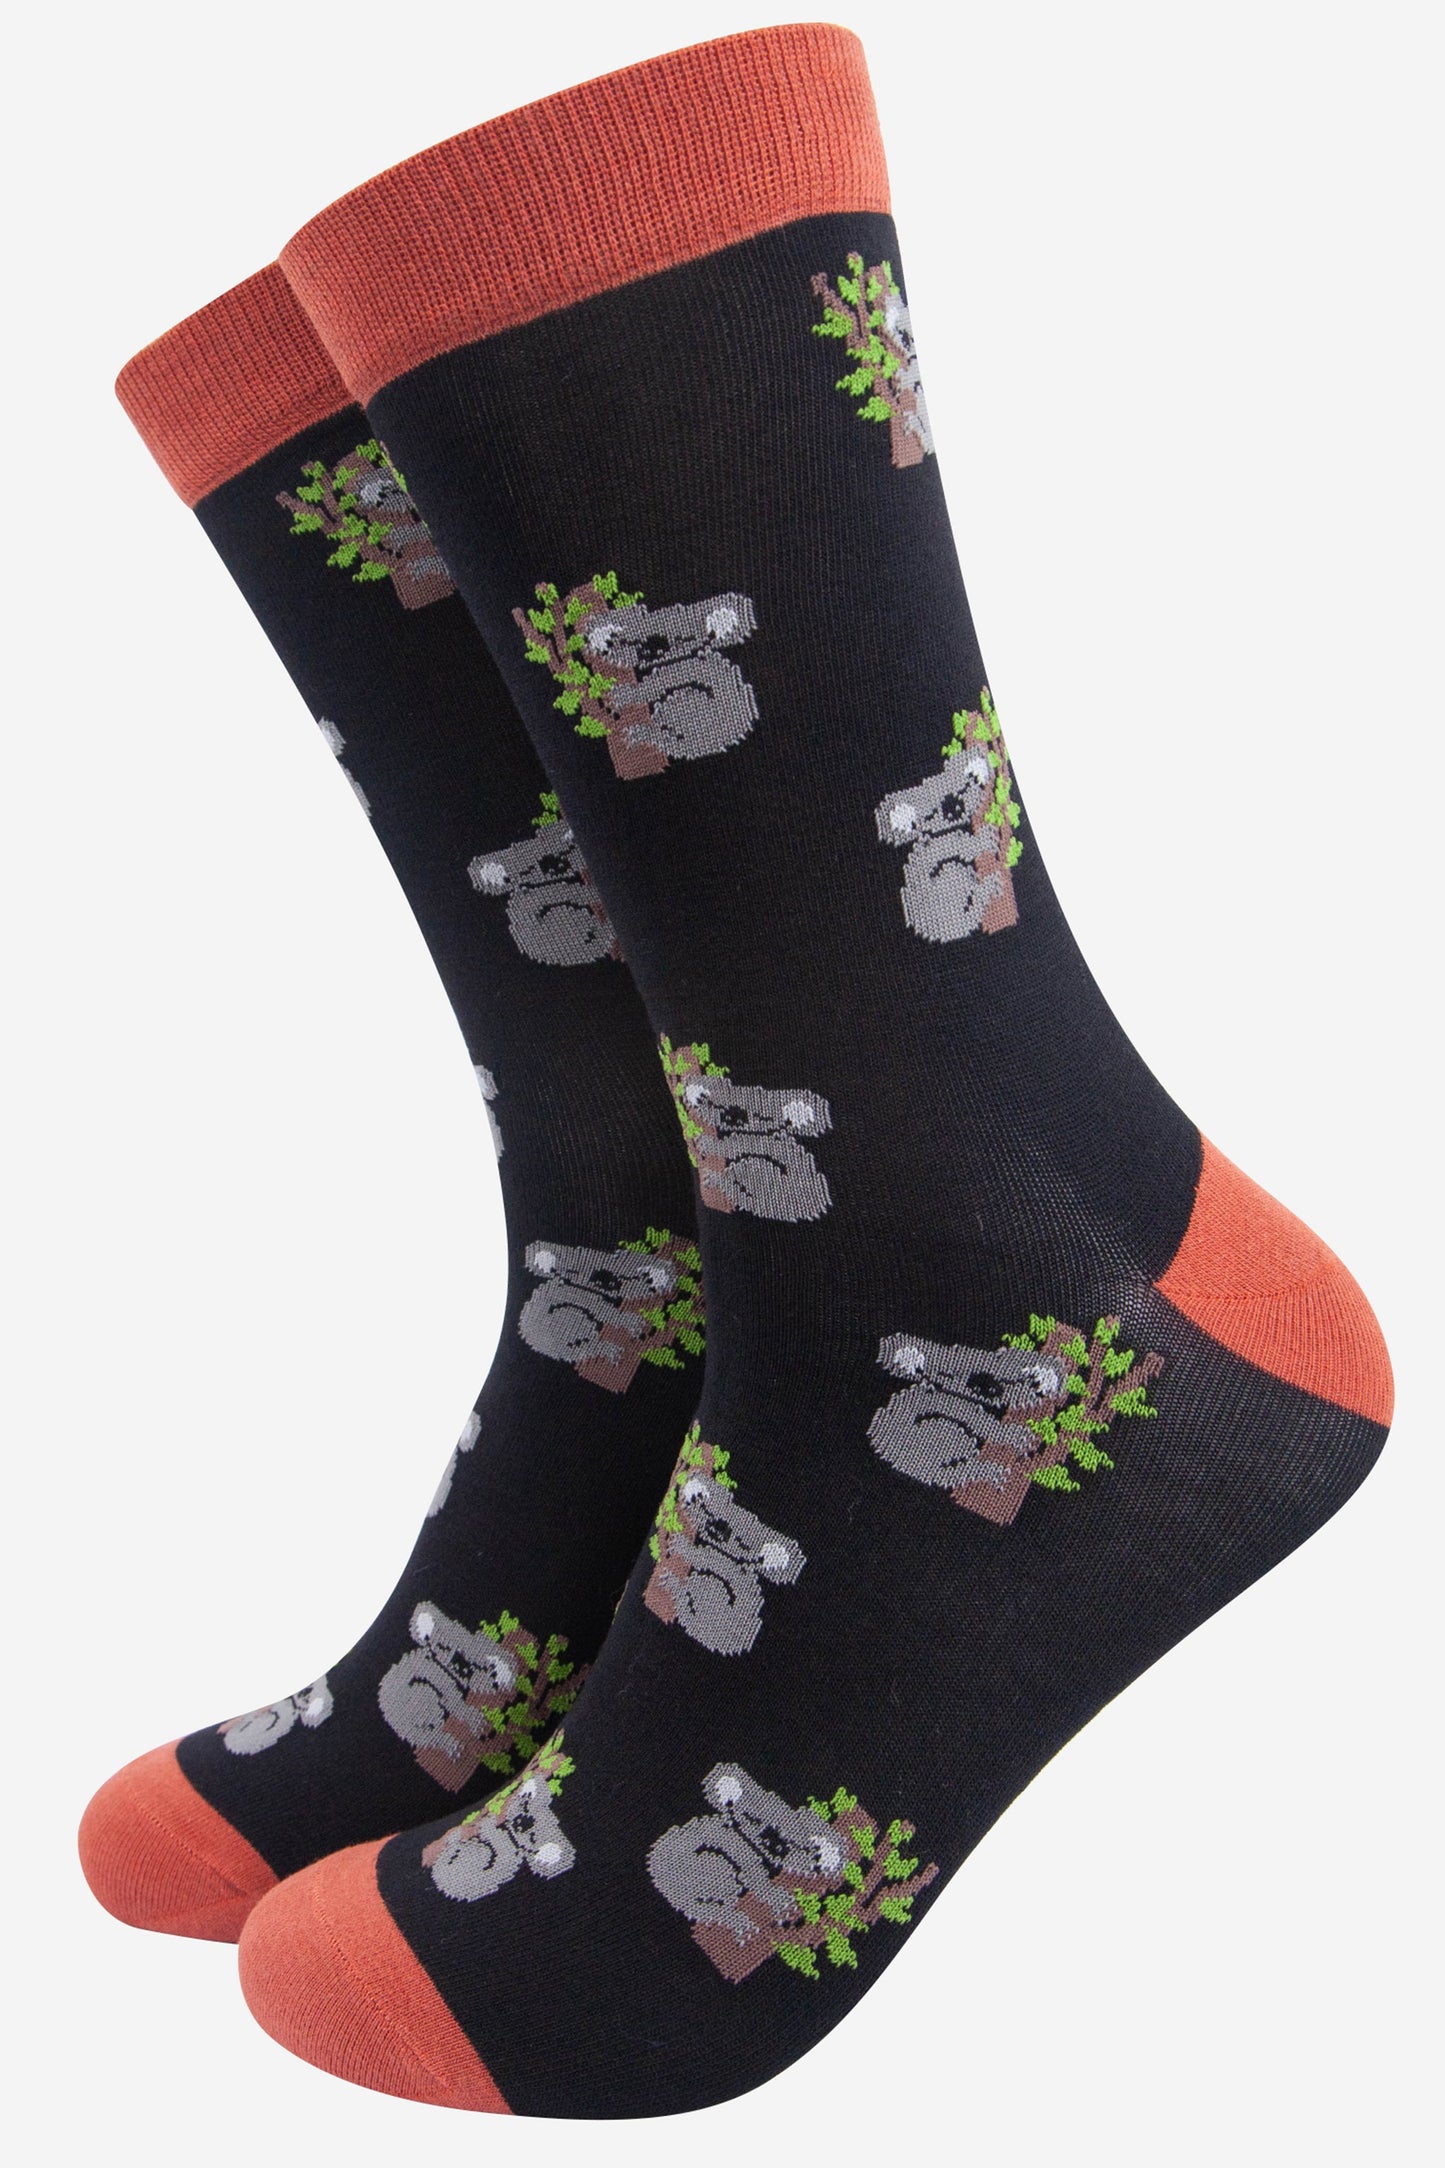 black and bamboo socks with an orange heel, toe and cuff with an all over pattern of sleeping koala bears